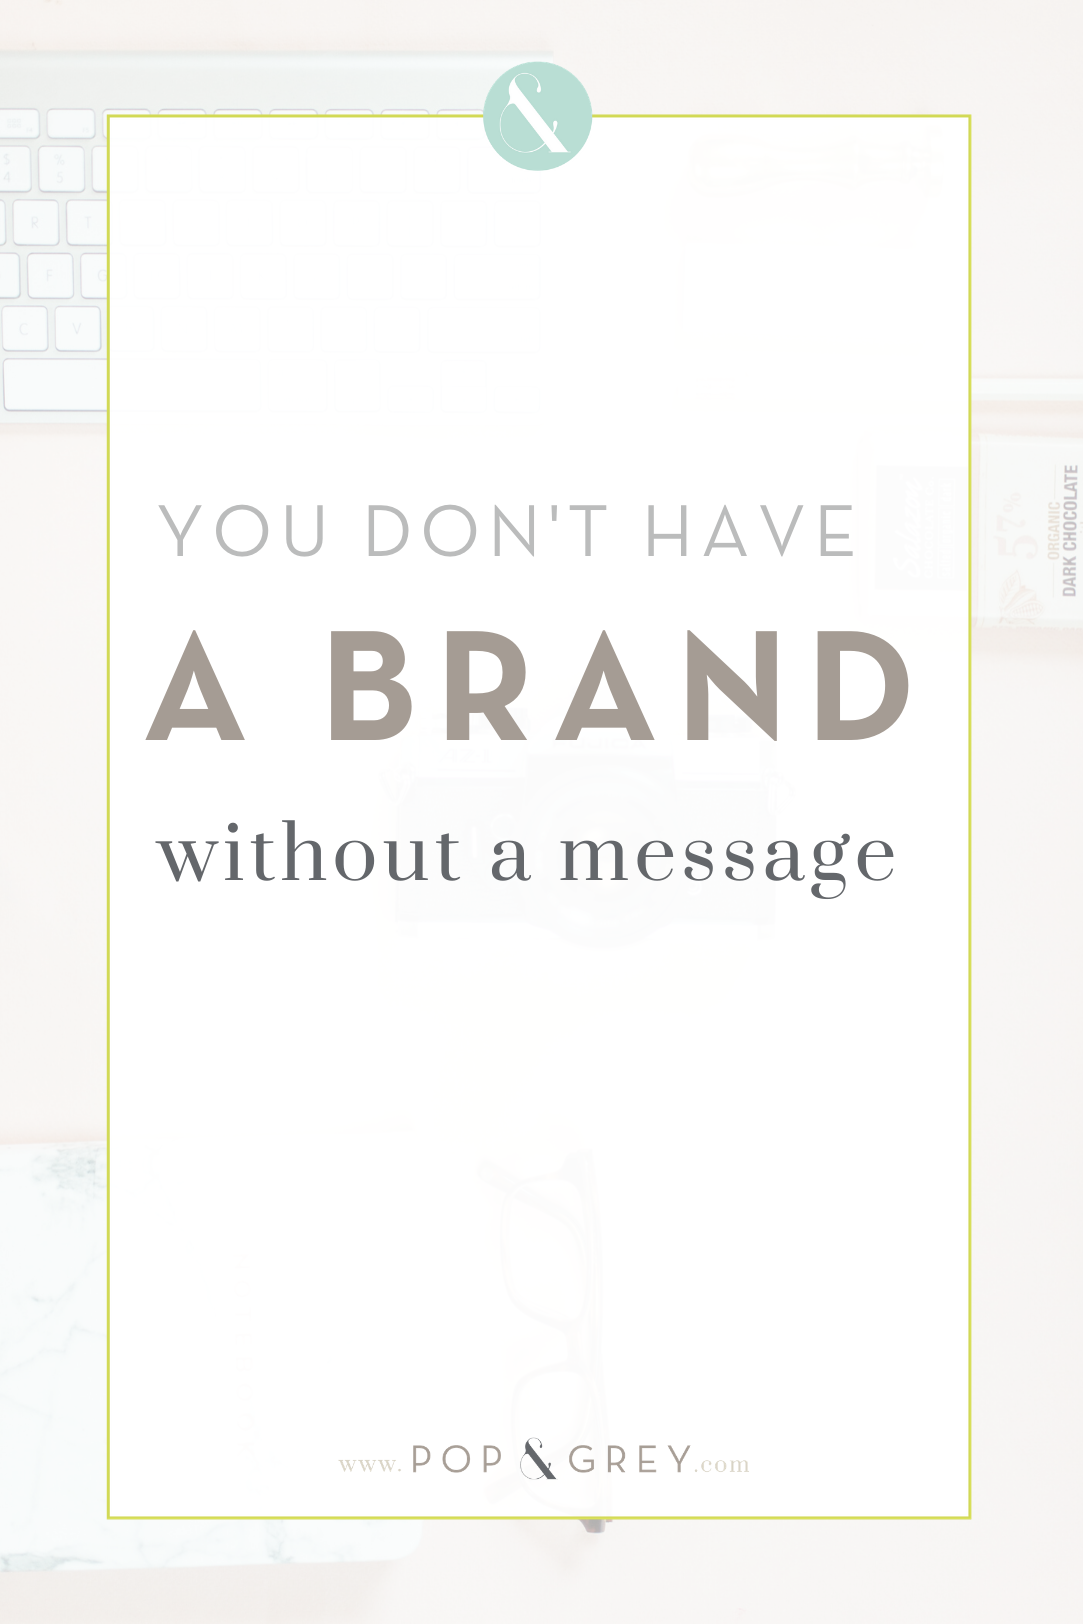 you don't have a brand without a message